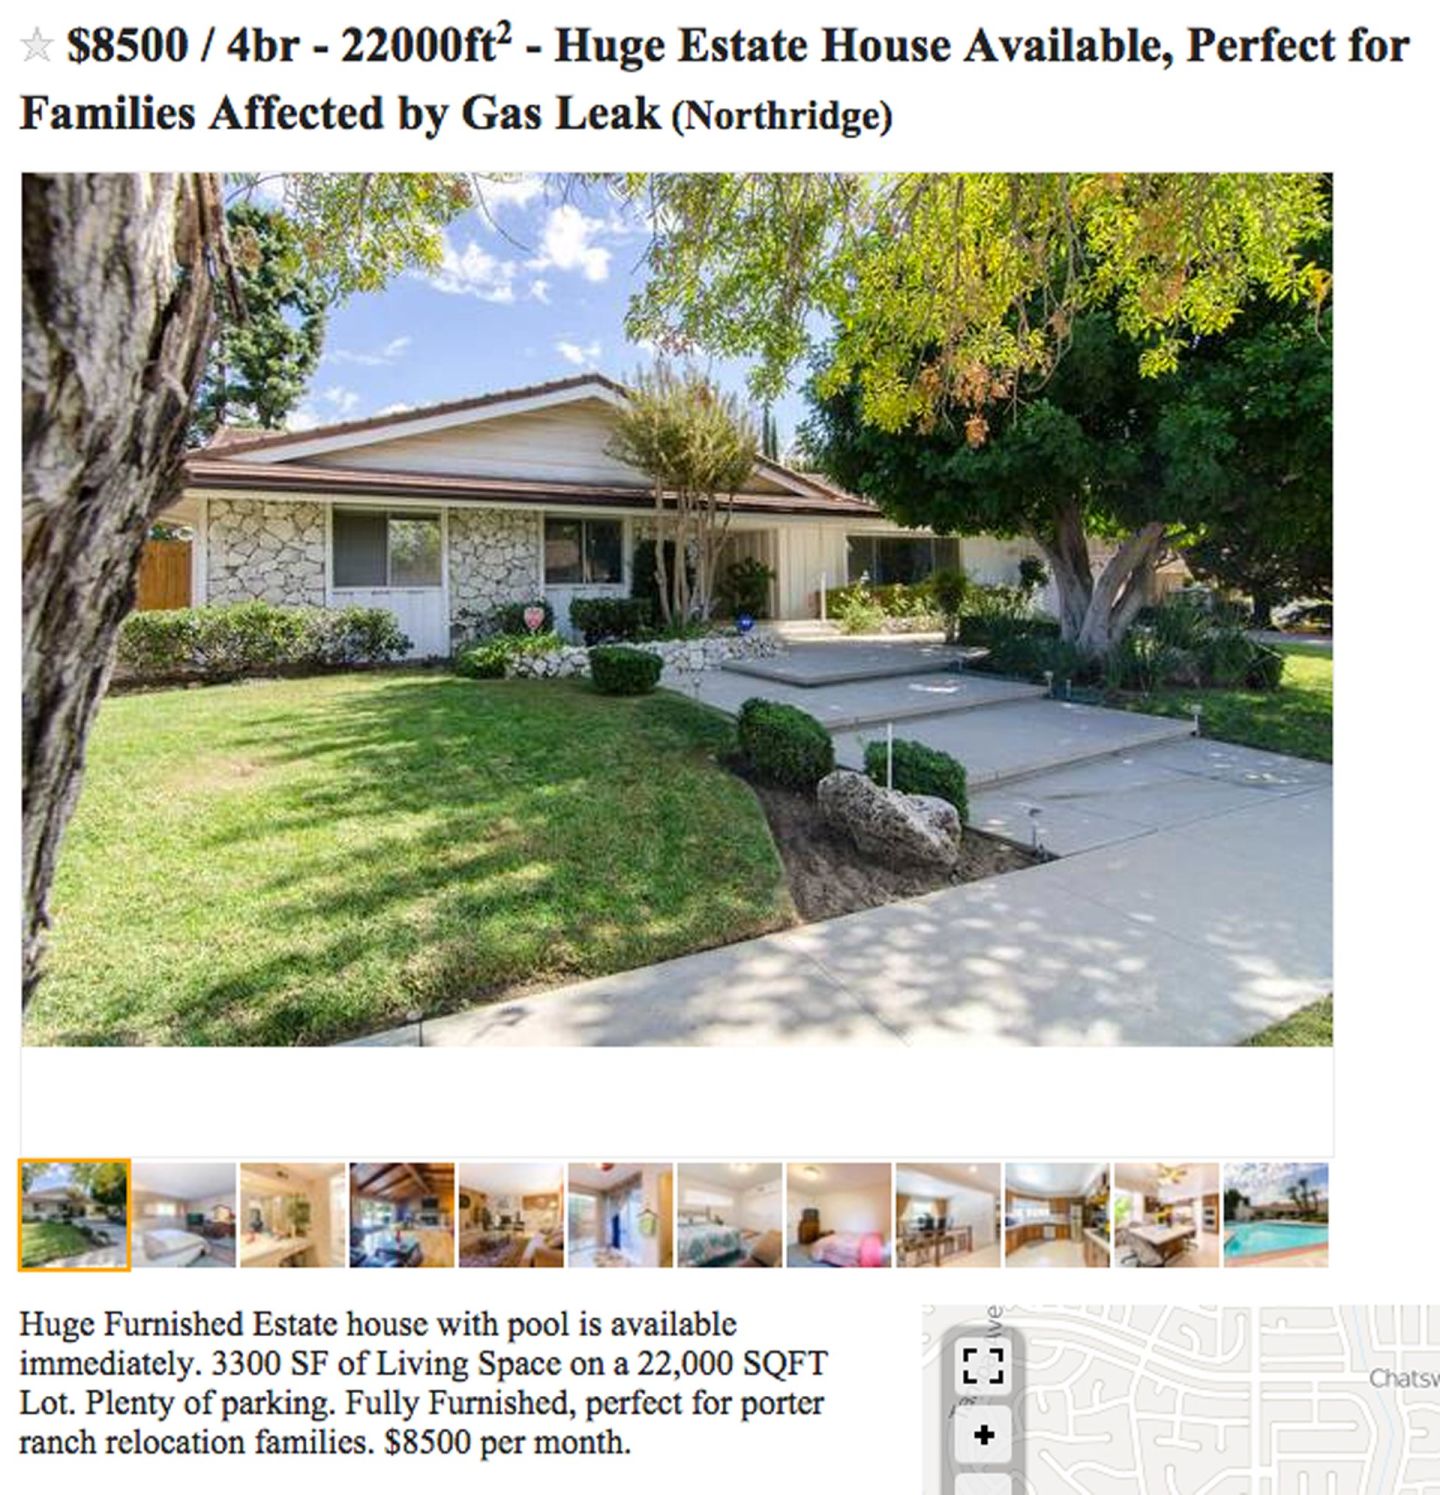 A screenshot of a Craigslist post advertising a home “perfect for families affected by gas leak.”